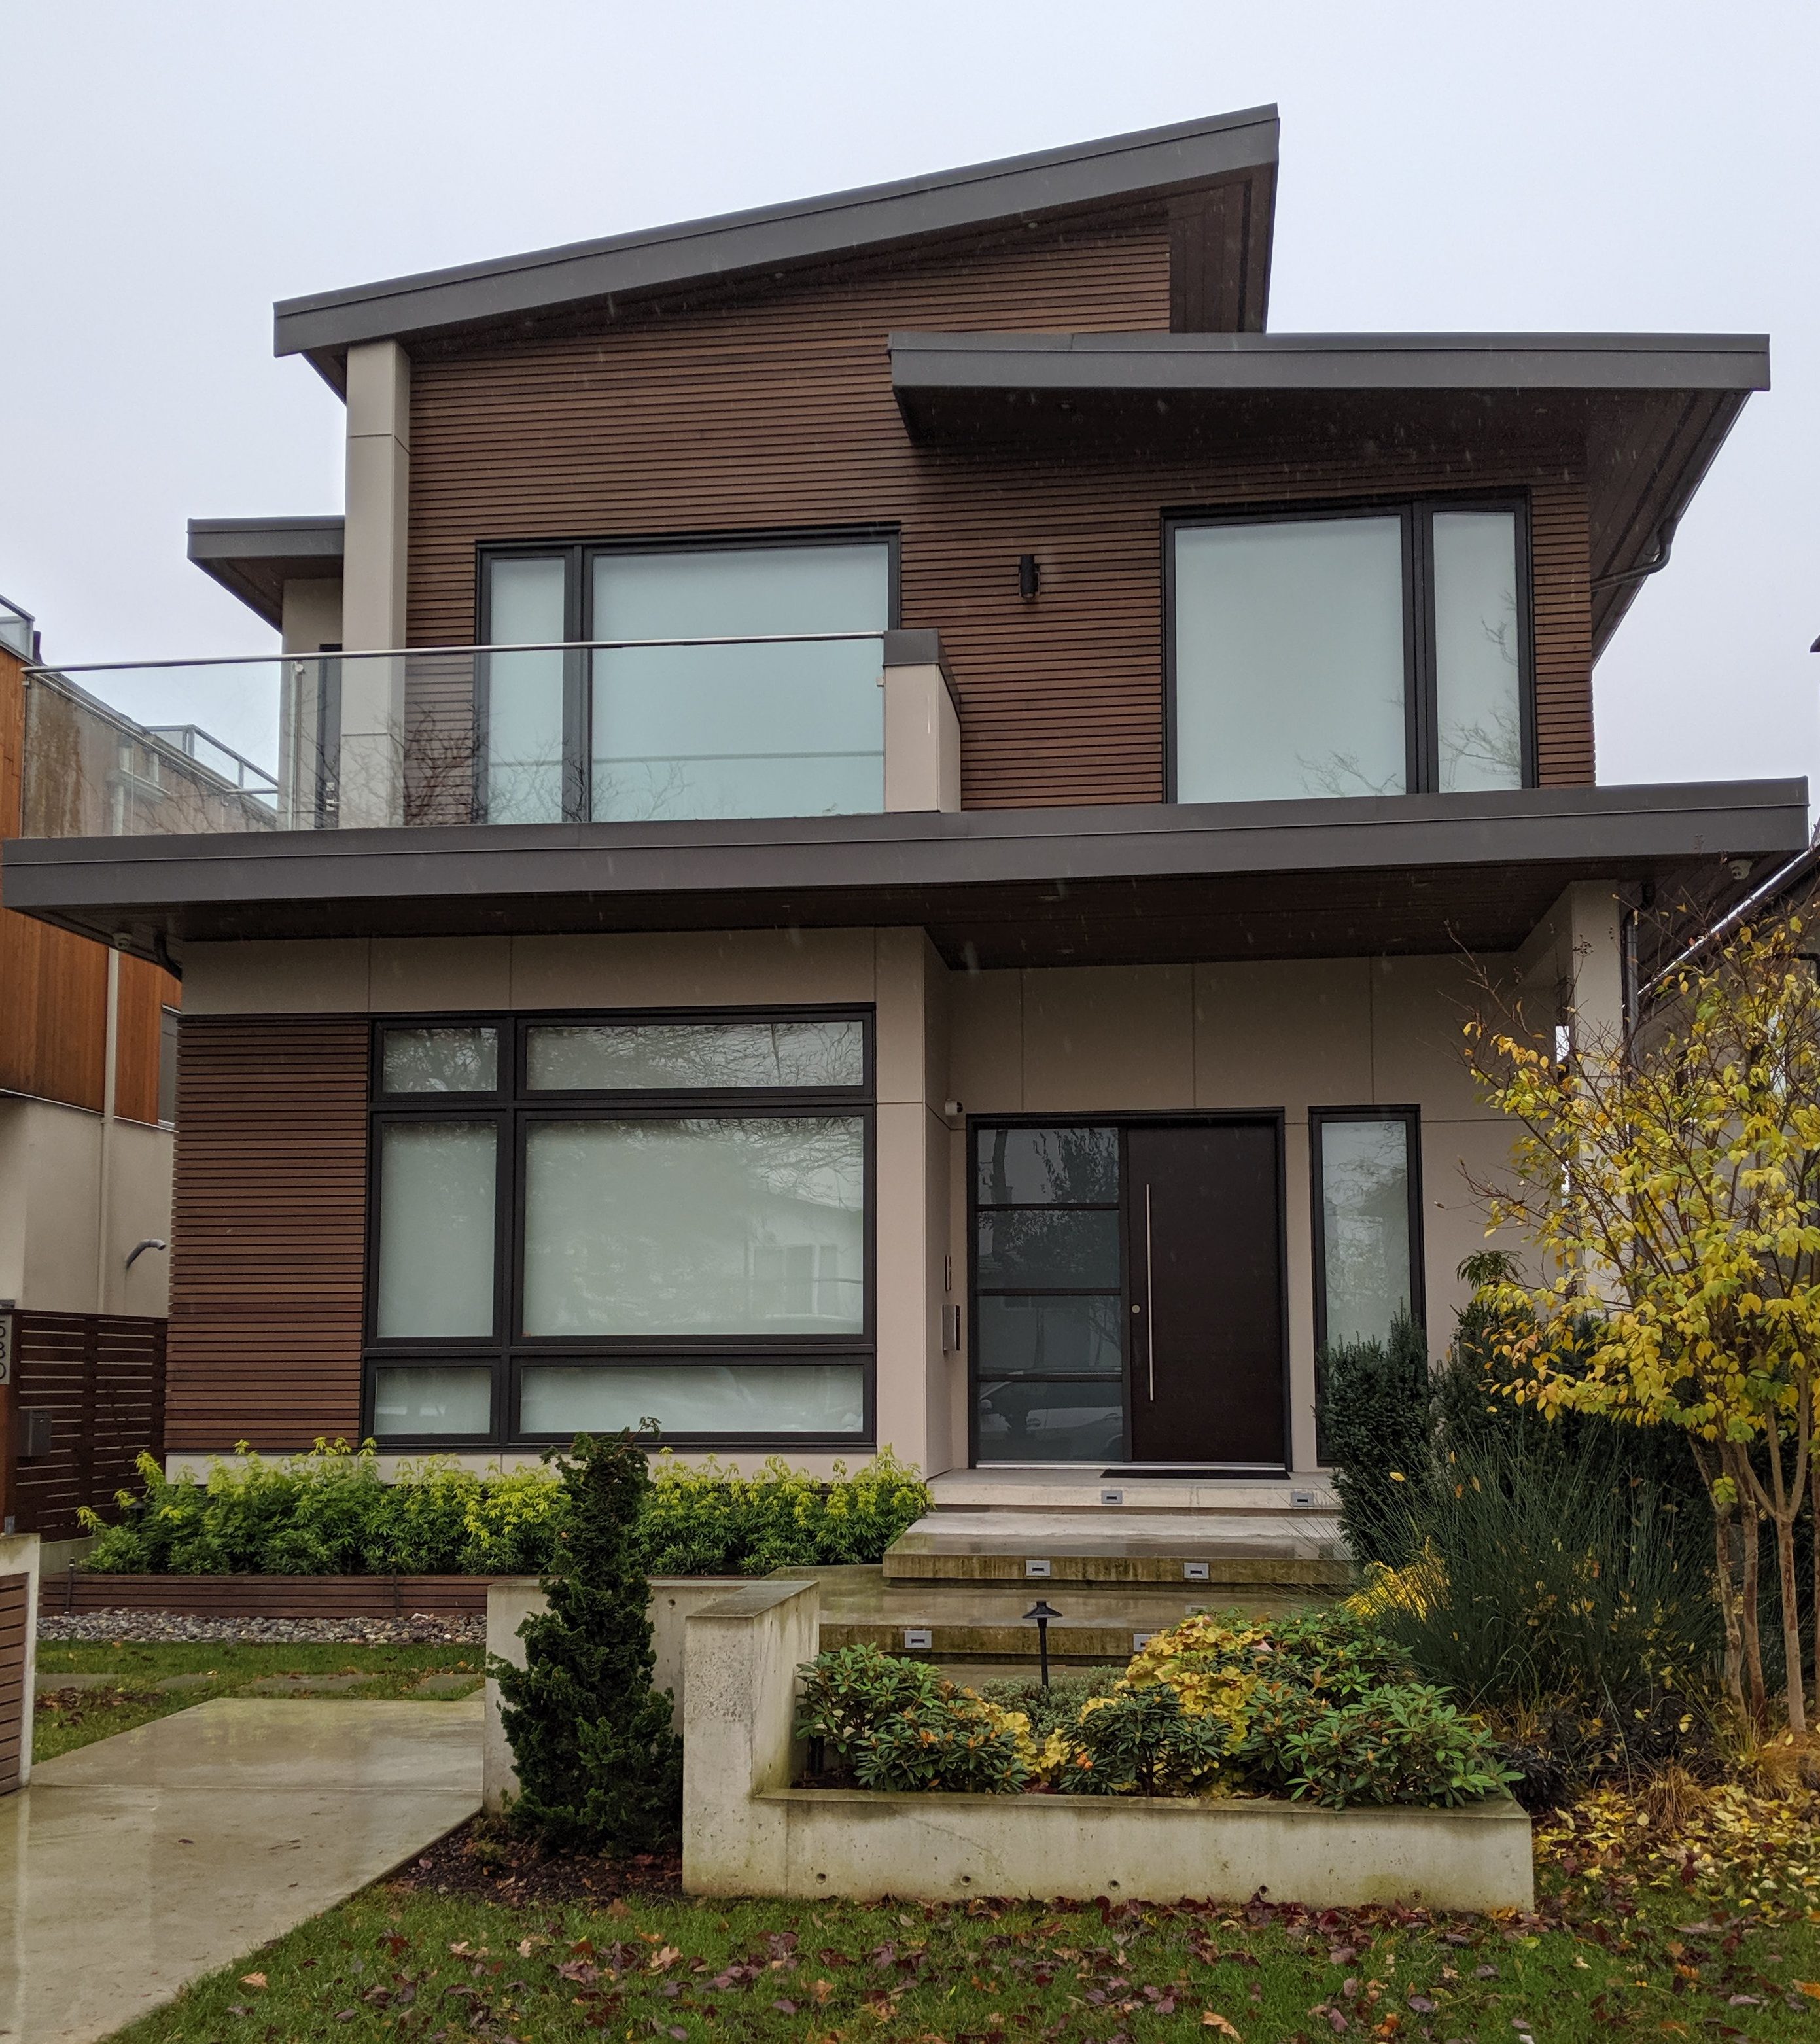 VANCOUVER CONTEMPORARY HOME - East 26th Avenue